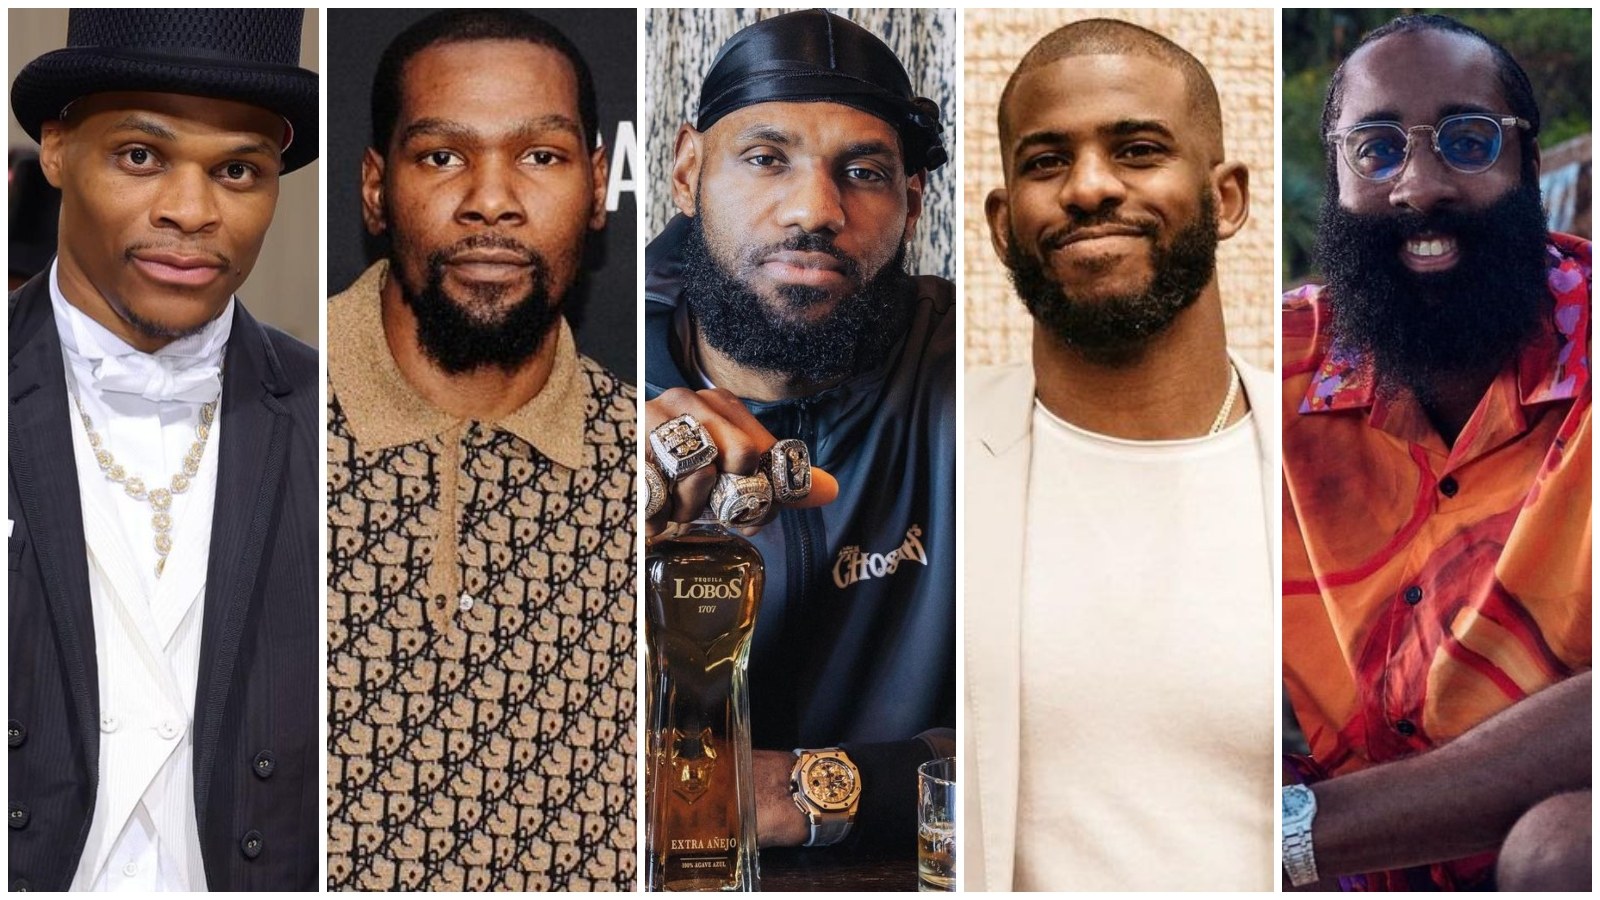 LeBron James, Chris Paul, Kevin Durant, Russell Westbrook and James Harden have all earned over US$200 million ... and counting. Photos: @kingjames, @cp3, @hkd_35, @russwest44, @jharden13/Instagram 